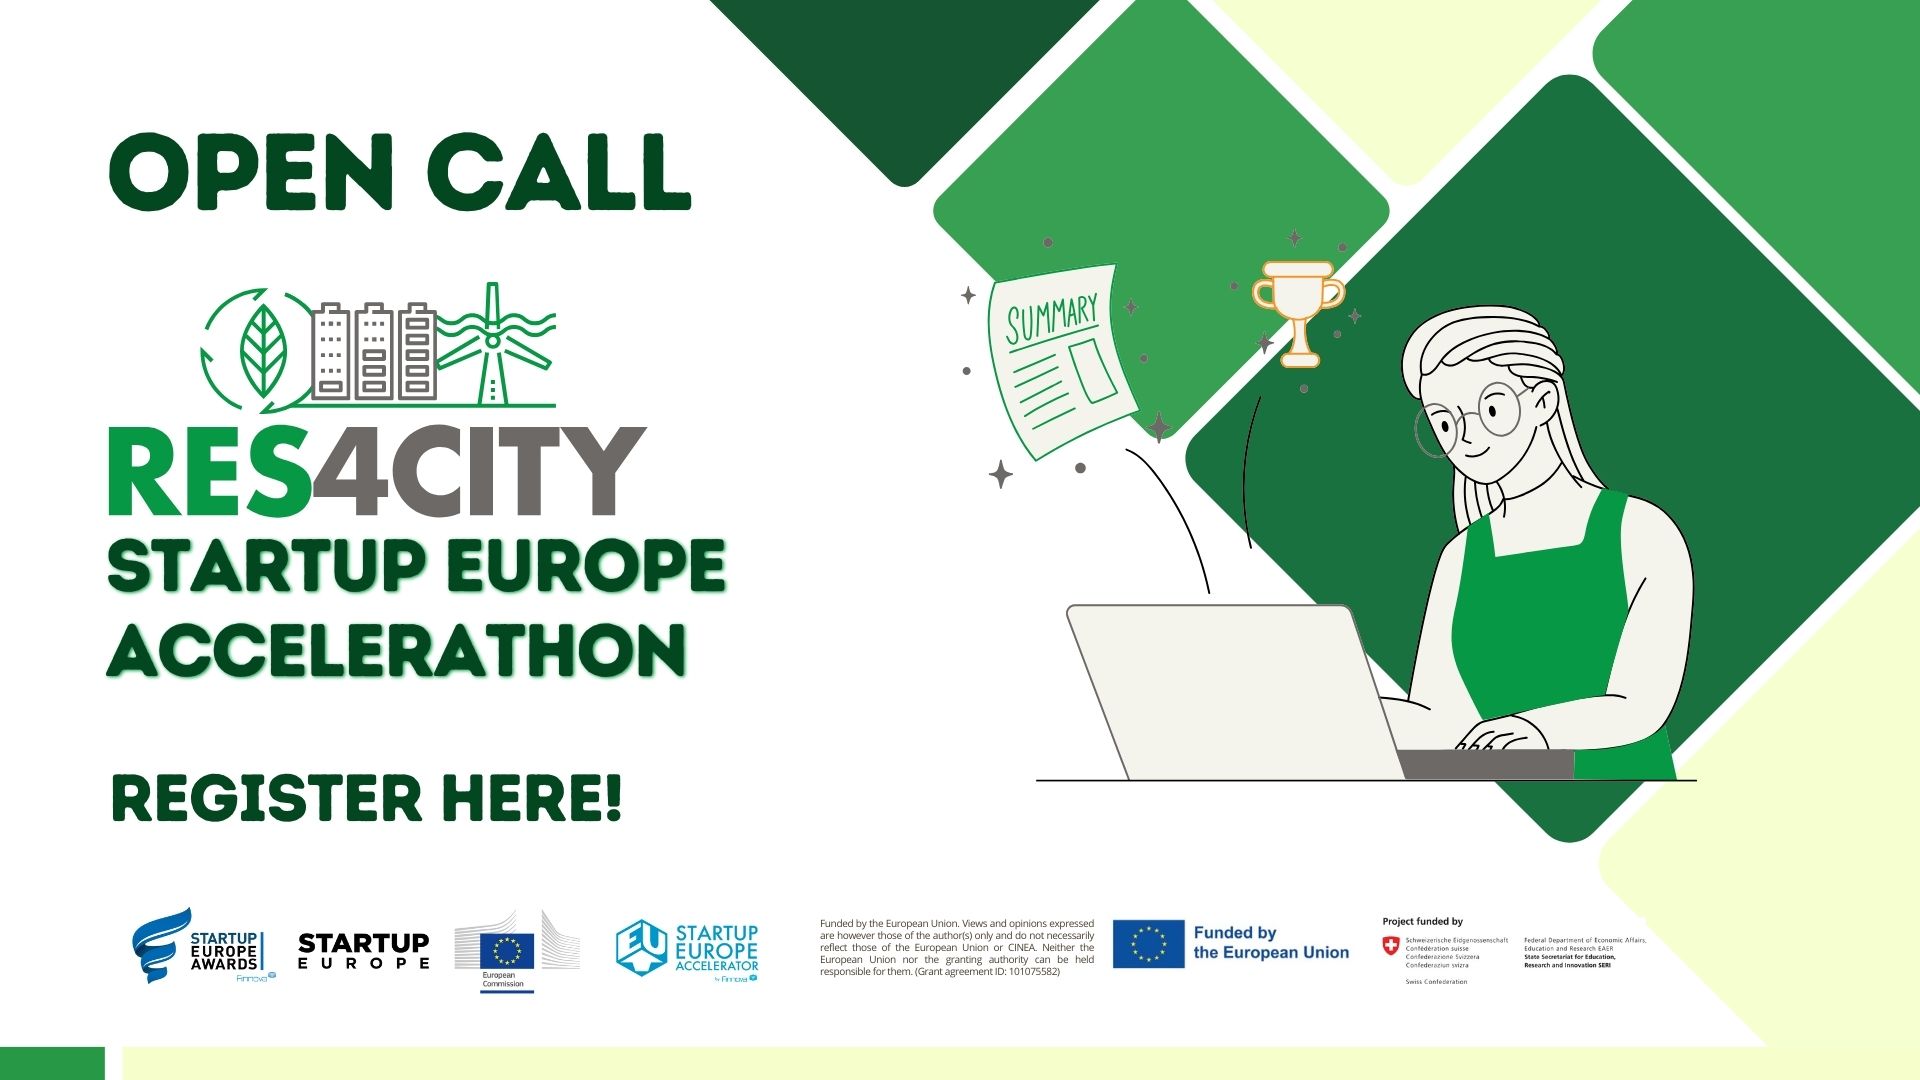 RES4CITY Startup Europe Accelerathon boosts green solutions for smart cities and provides access to European funds